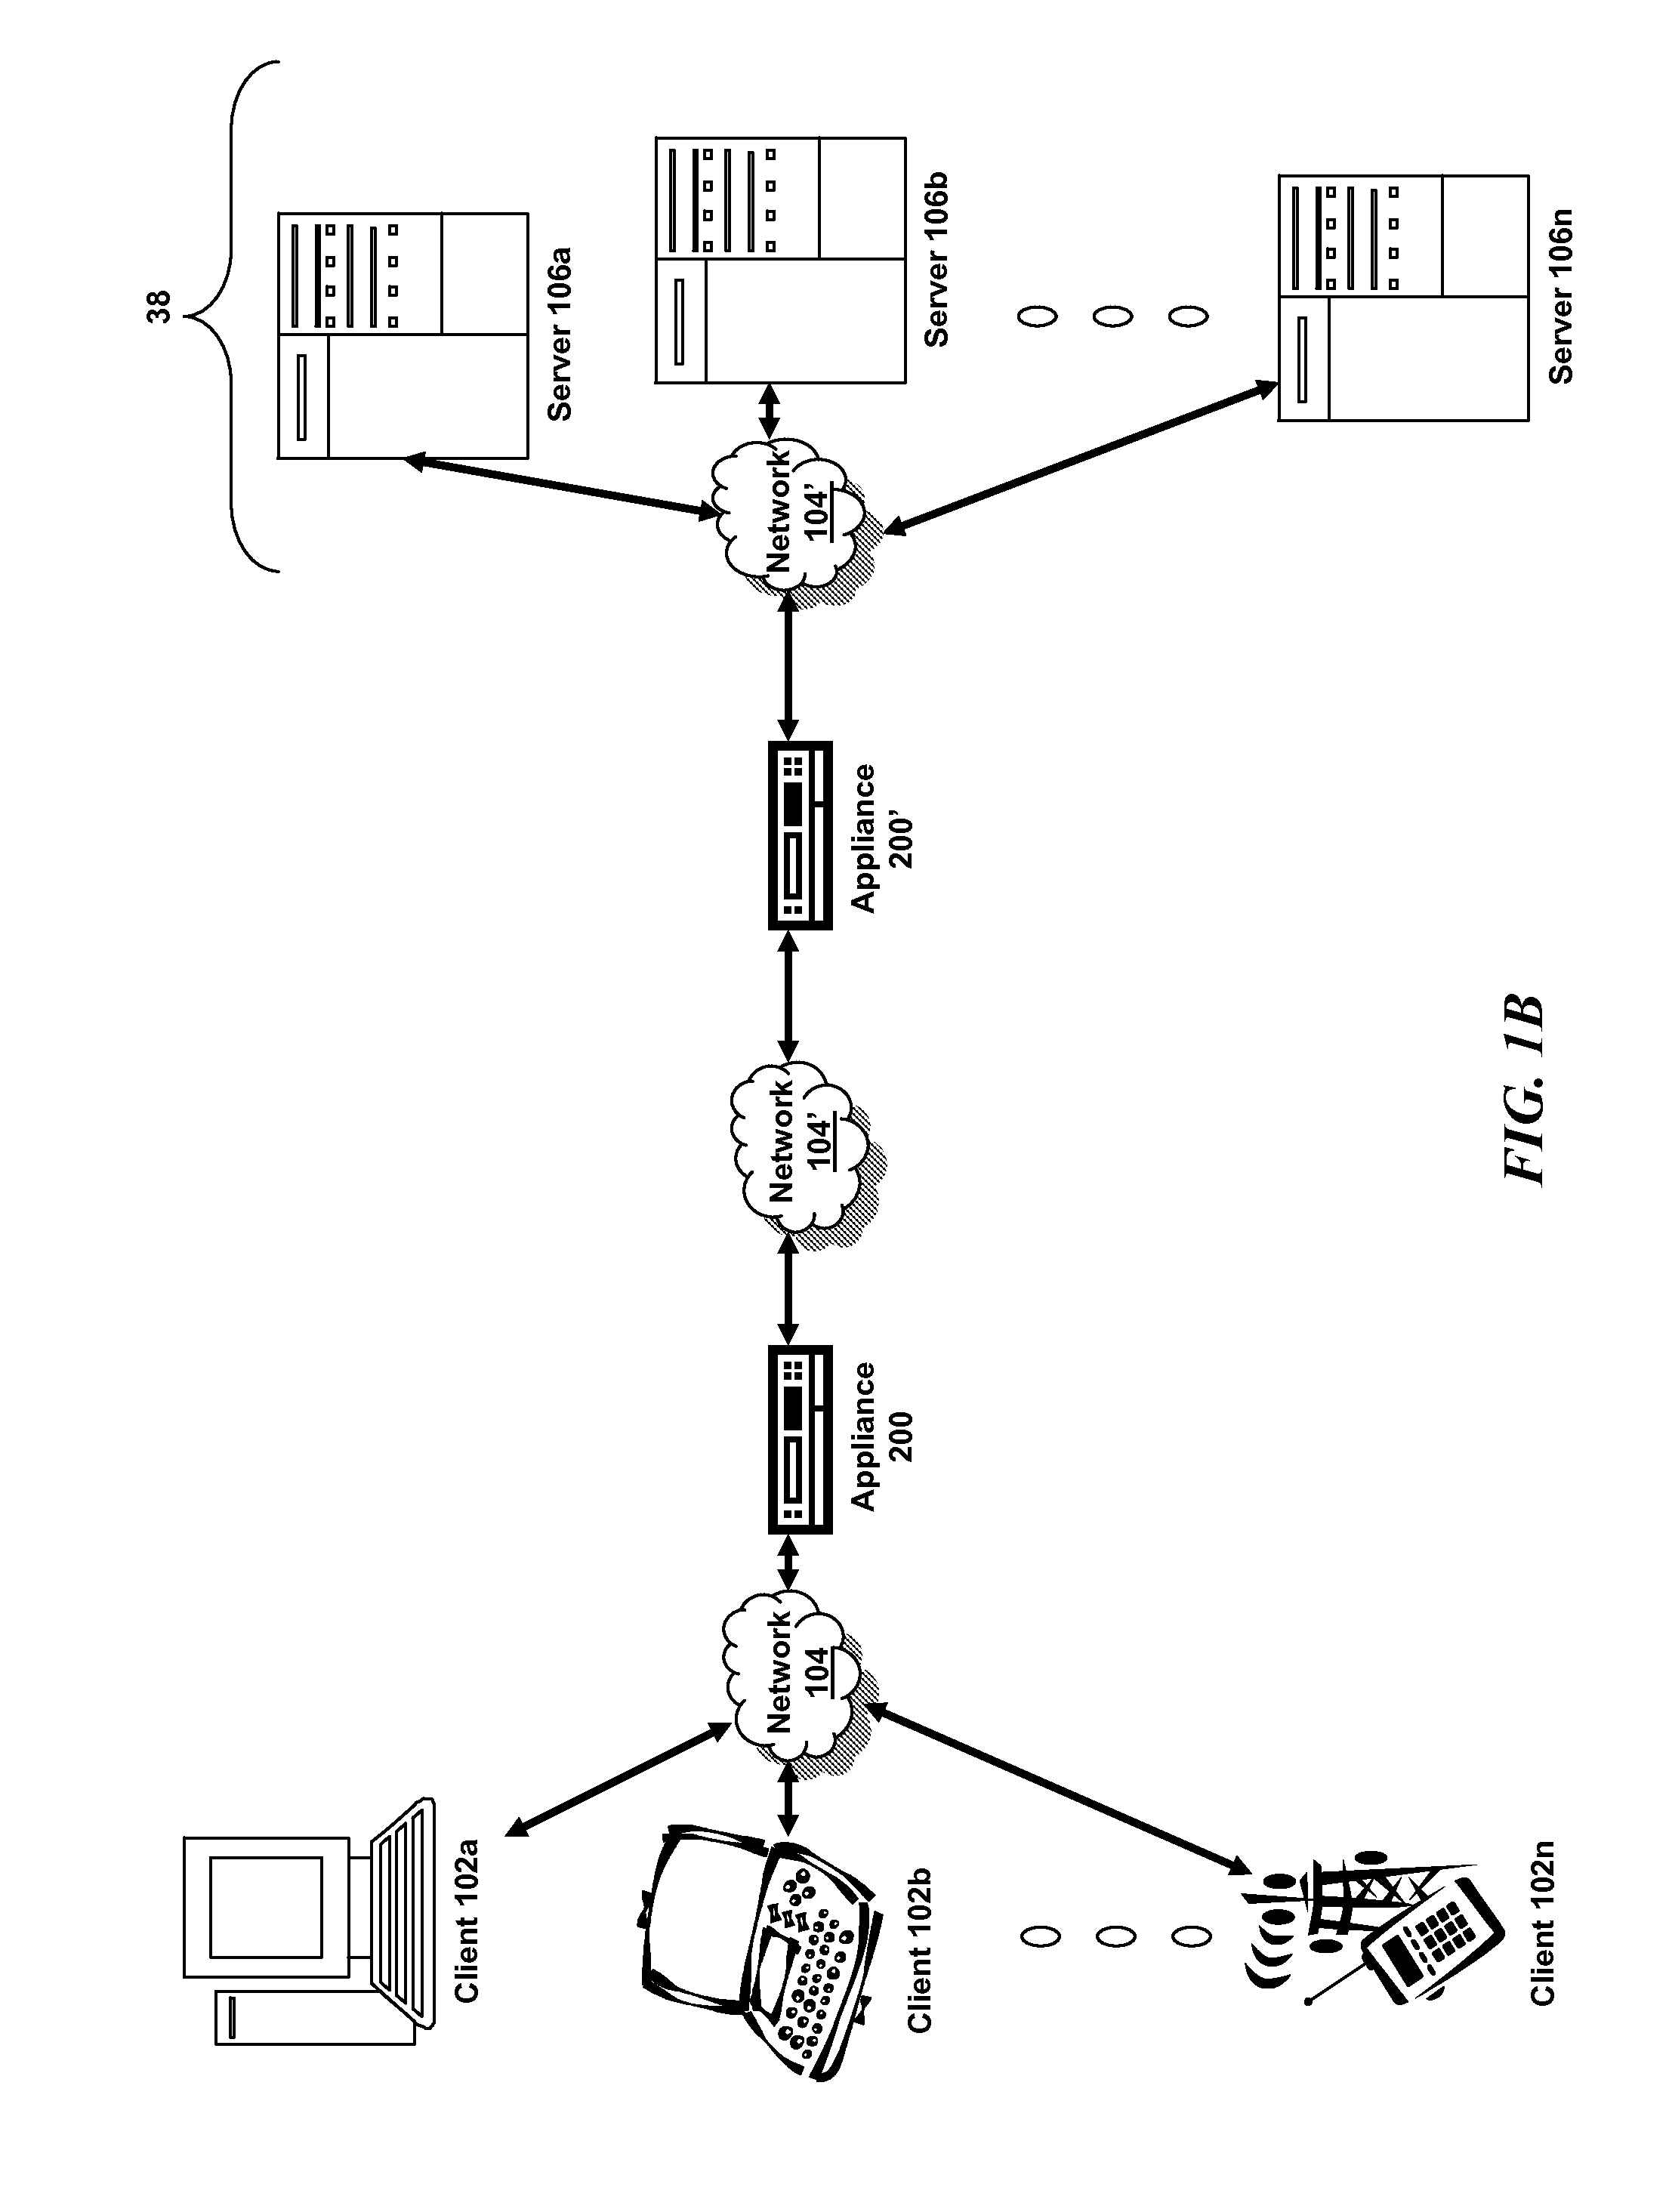 Systems and methods for mixed mode handling of ipv6 and ipv4 traffic by a virtual server